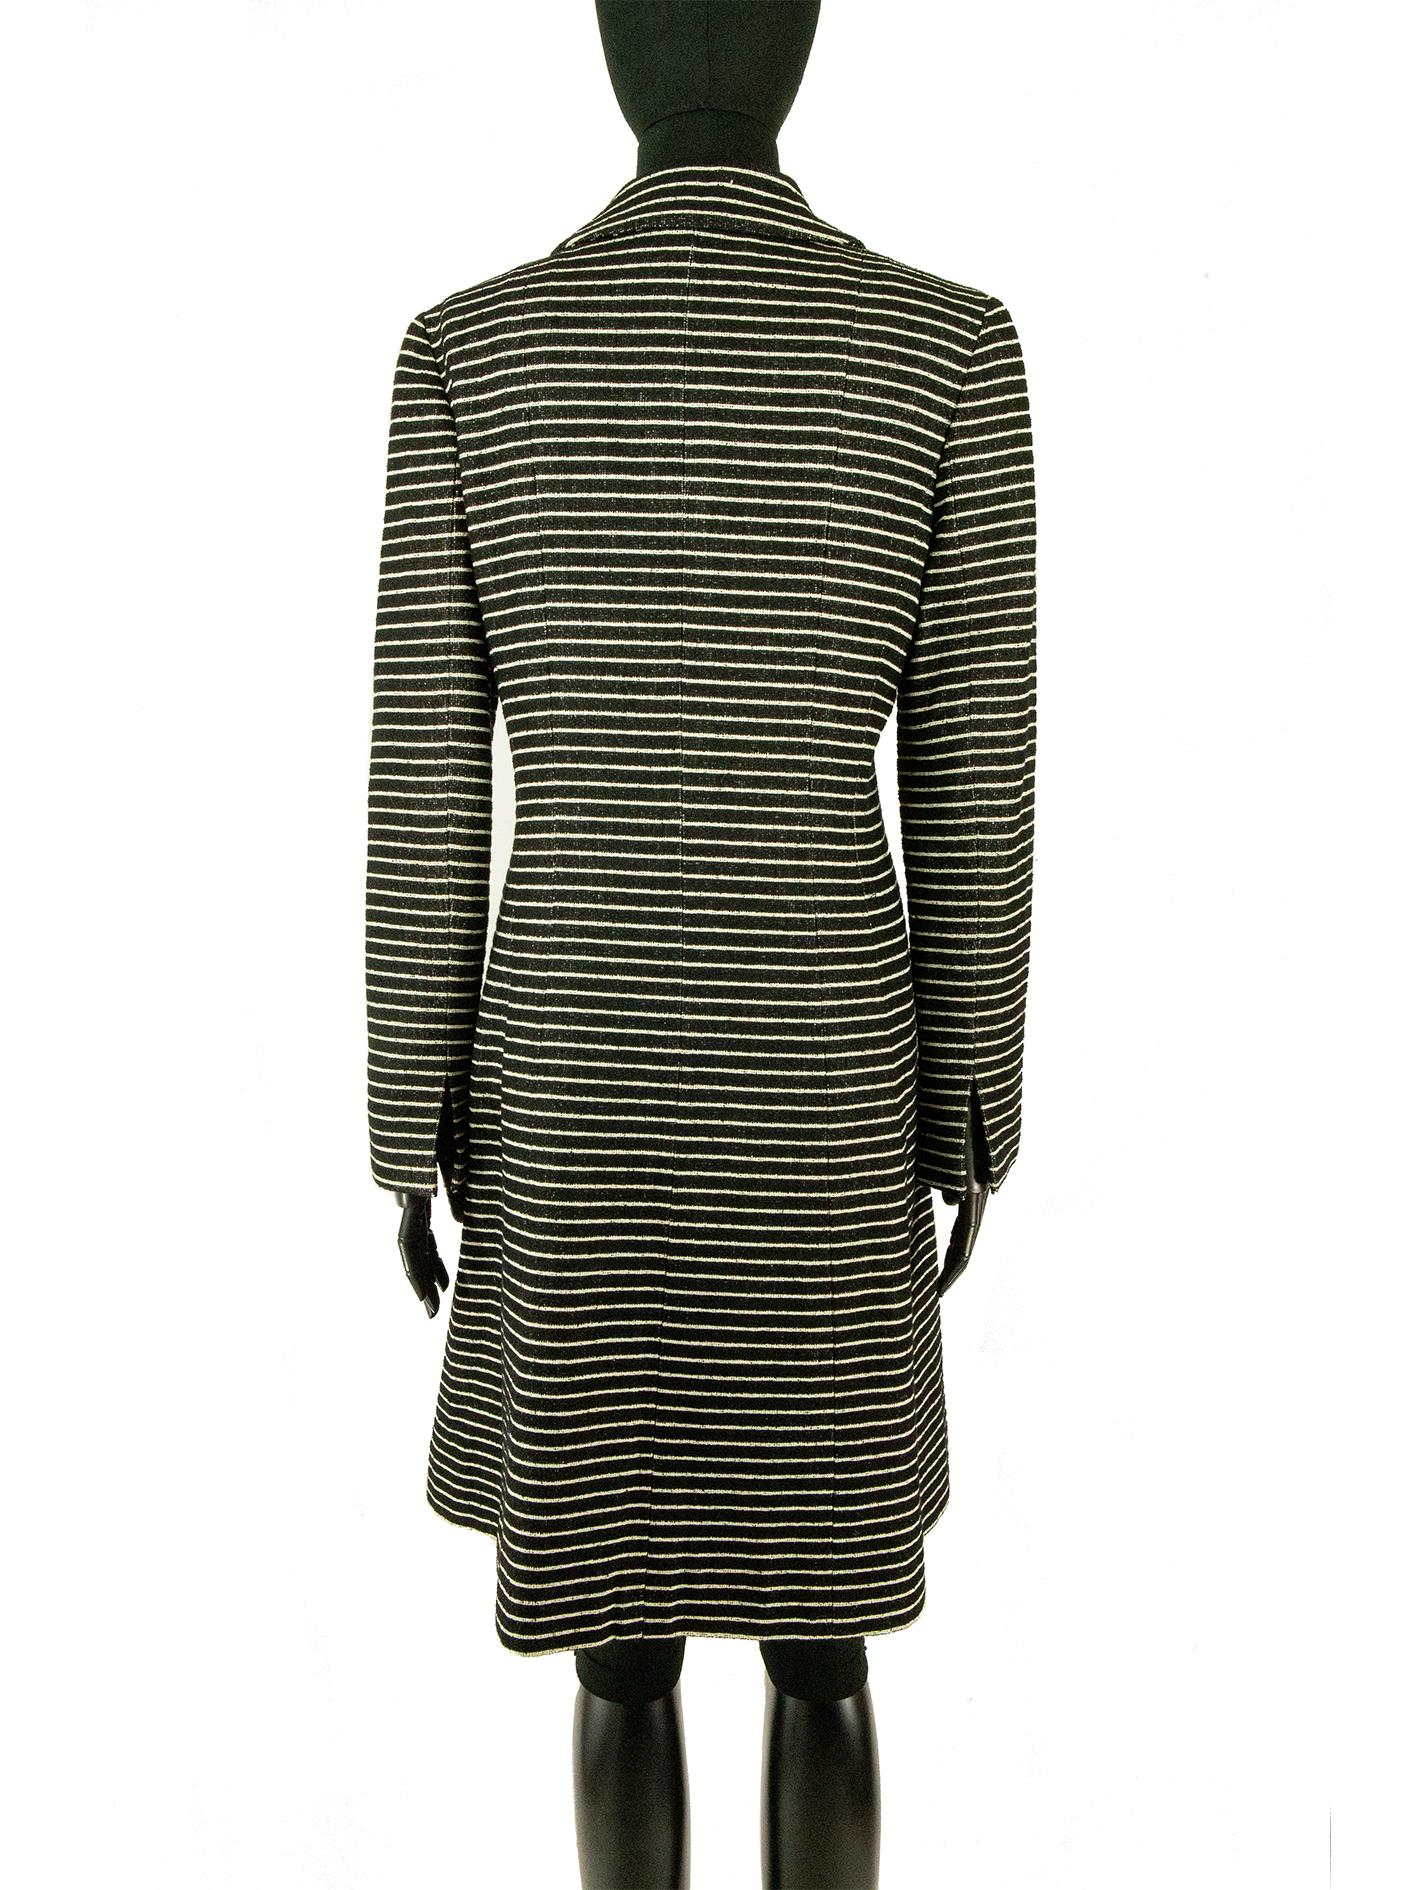 Women's Chanel Cruise 2001 Striped Coat For Sale